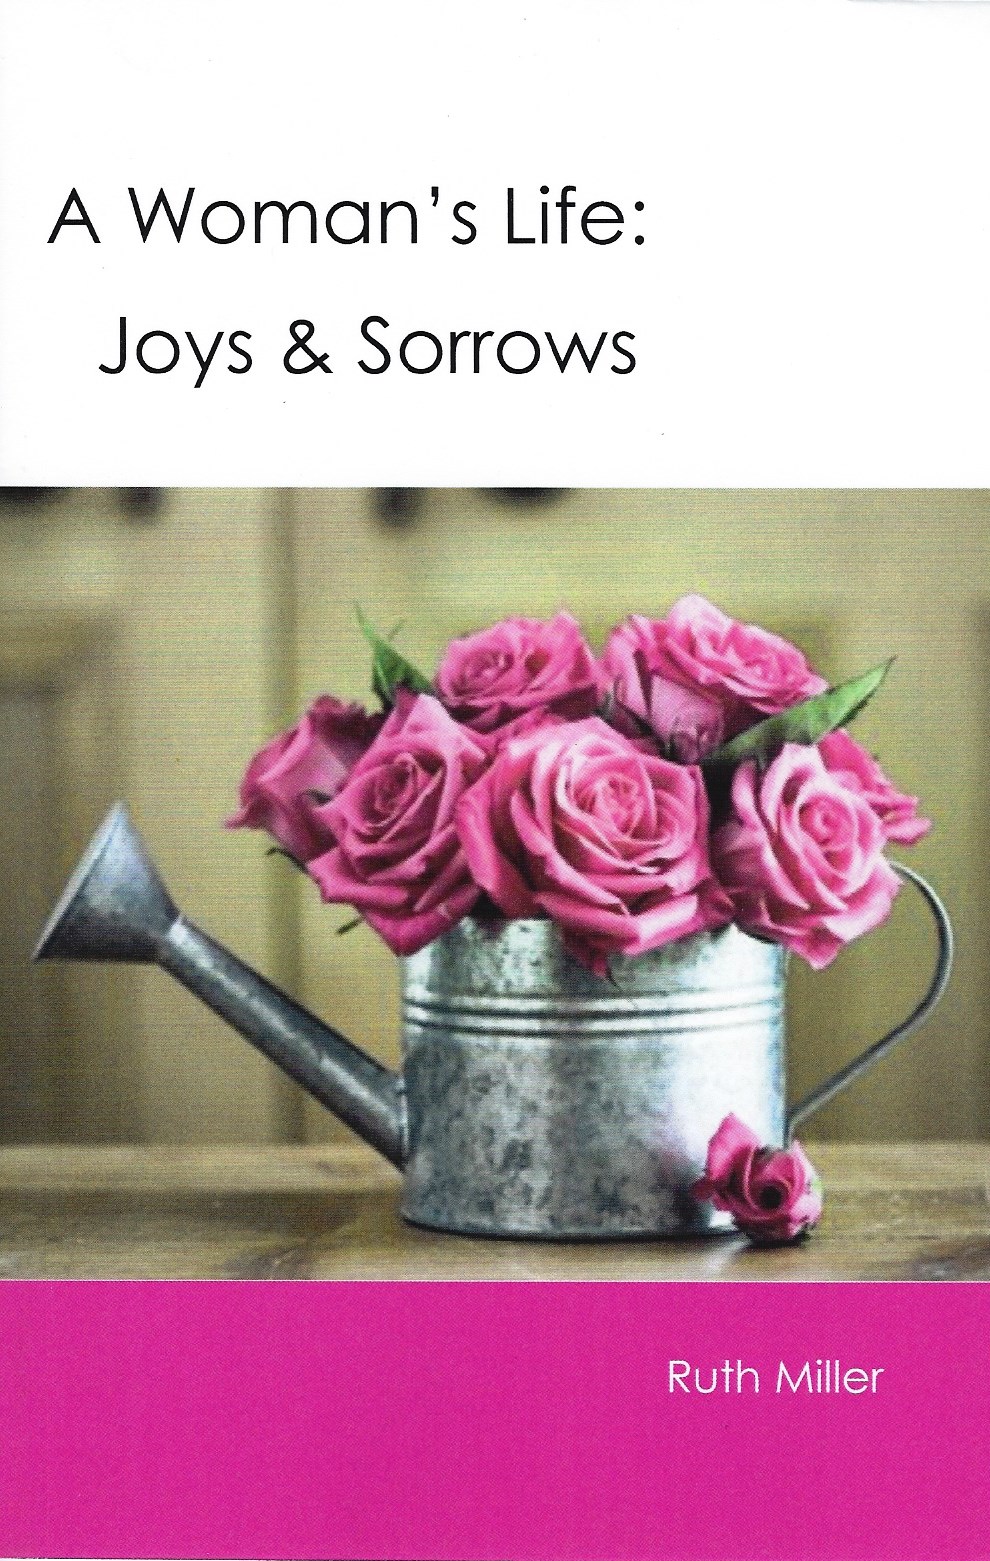 A WOMAN'S LIFE: JOYS AND SORROWS Ruth Miller